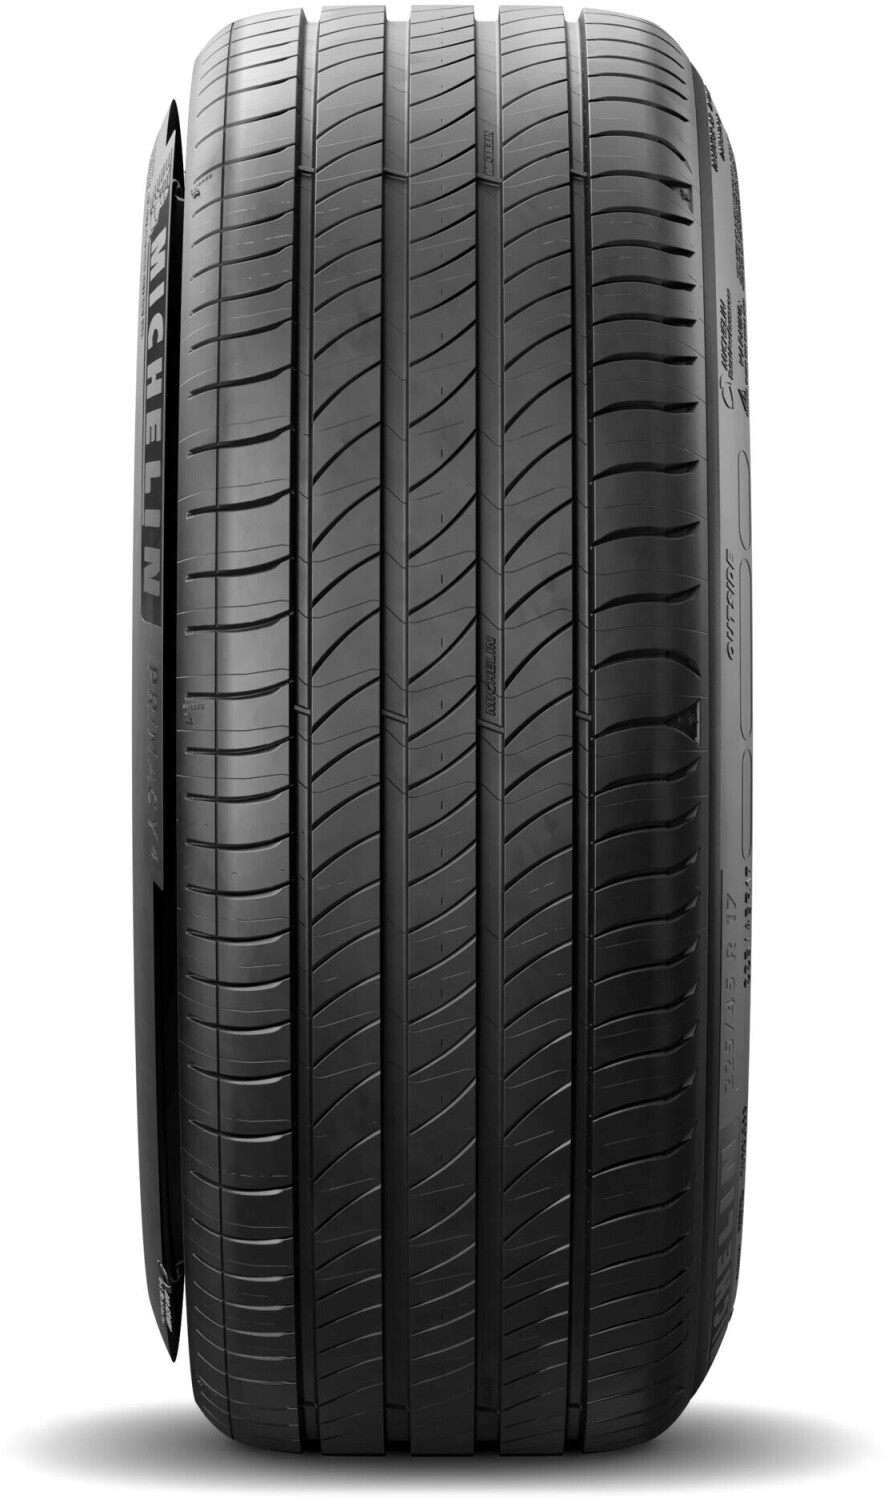 XL on Deals 94V – from S1 225/45 £108.51 Primacy Buy (Today) Best R17 4 Michelin